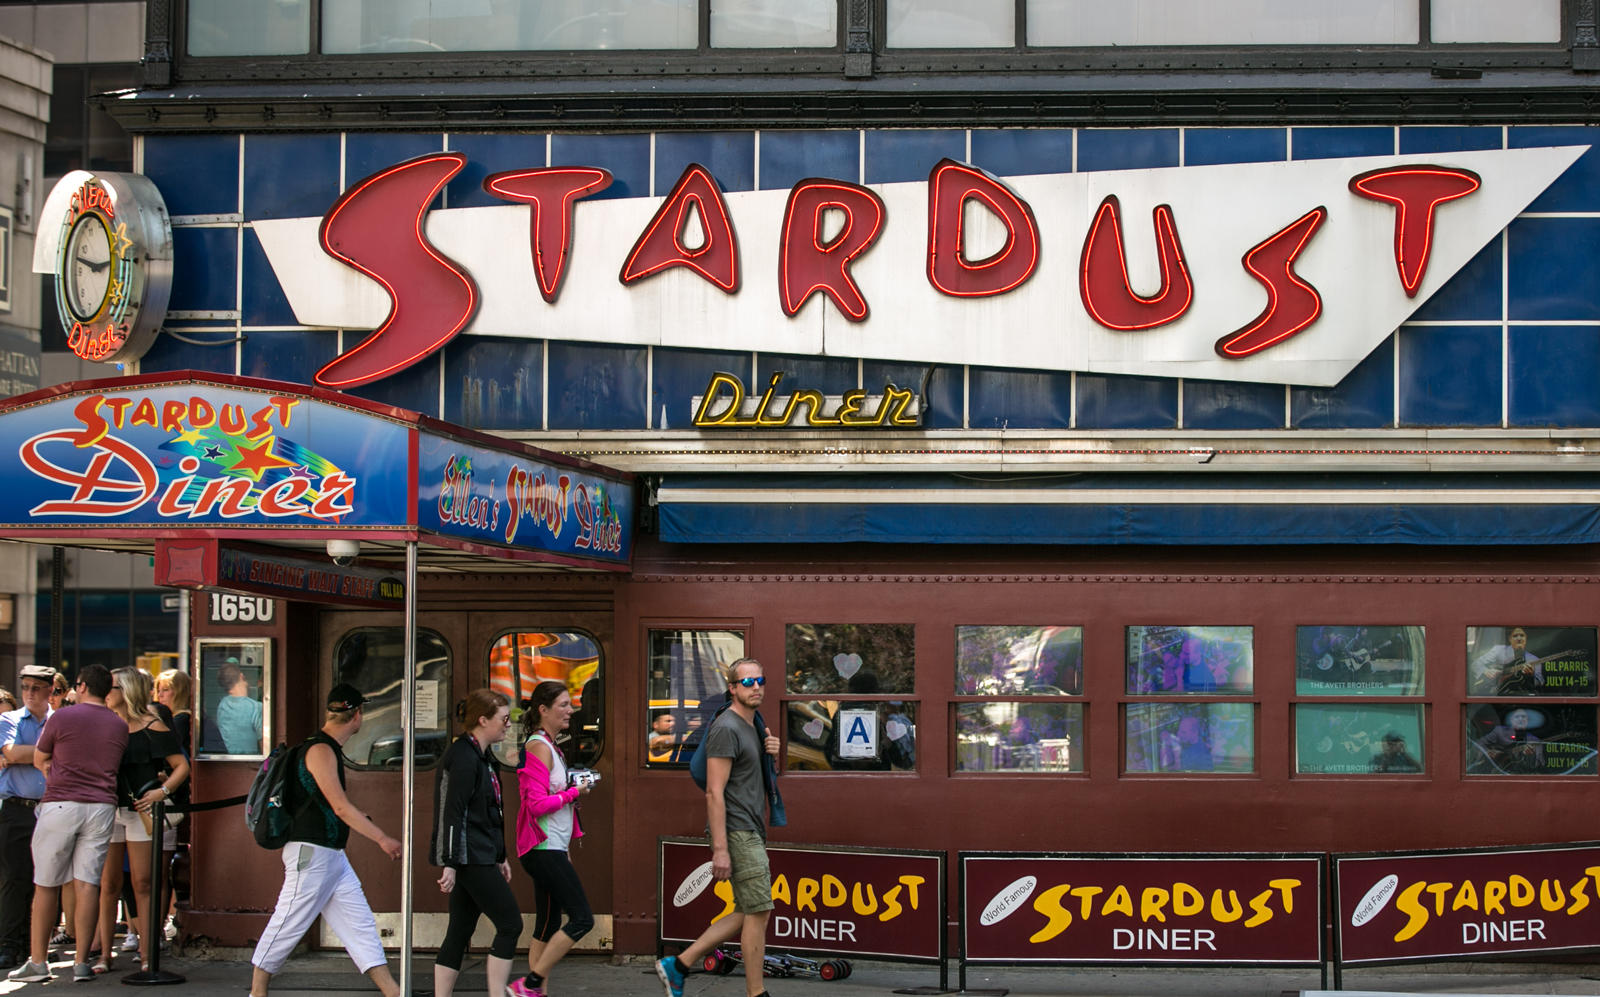 Ellen’s Stardust Diner at 1650 Broadway (Photo by George Rose/Getty Images)